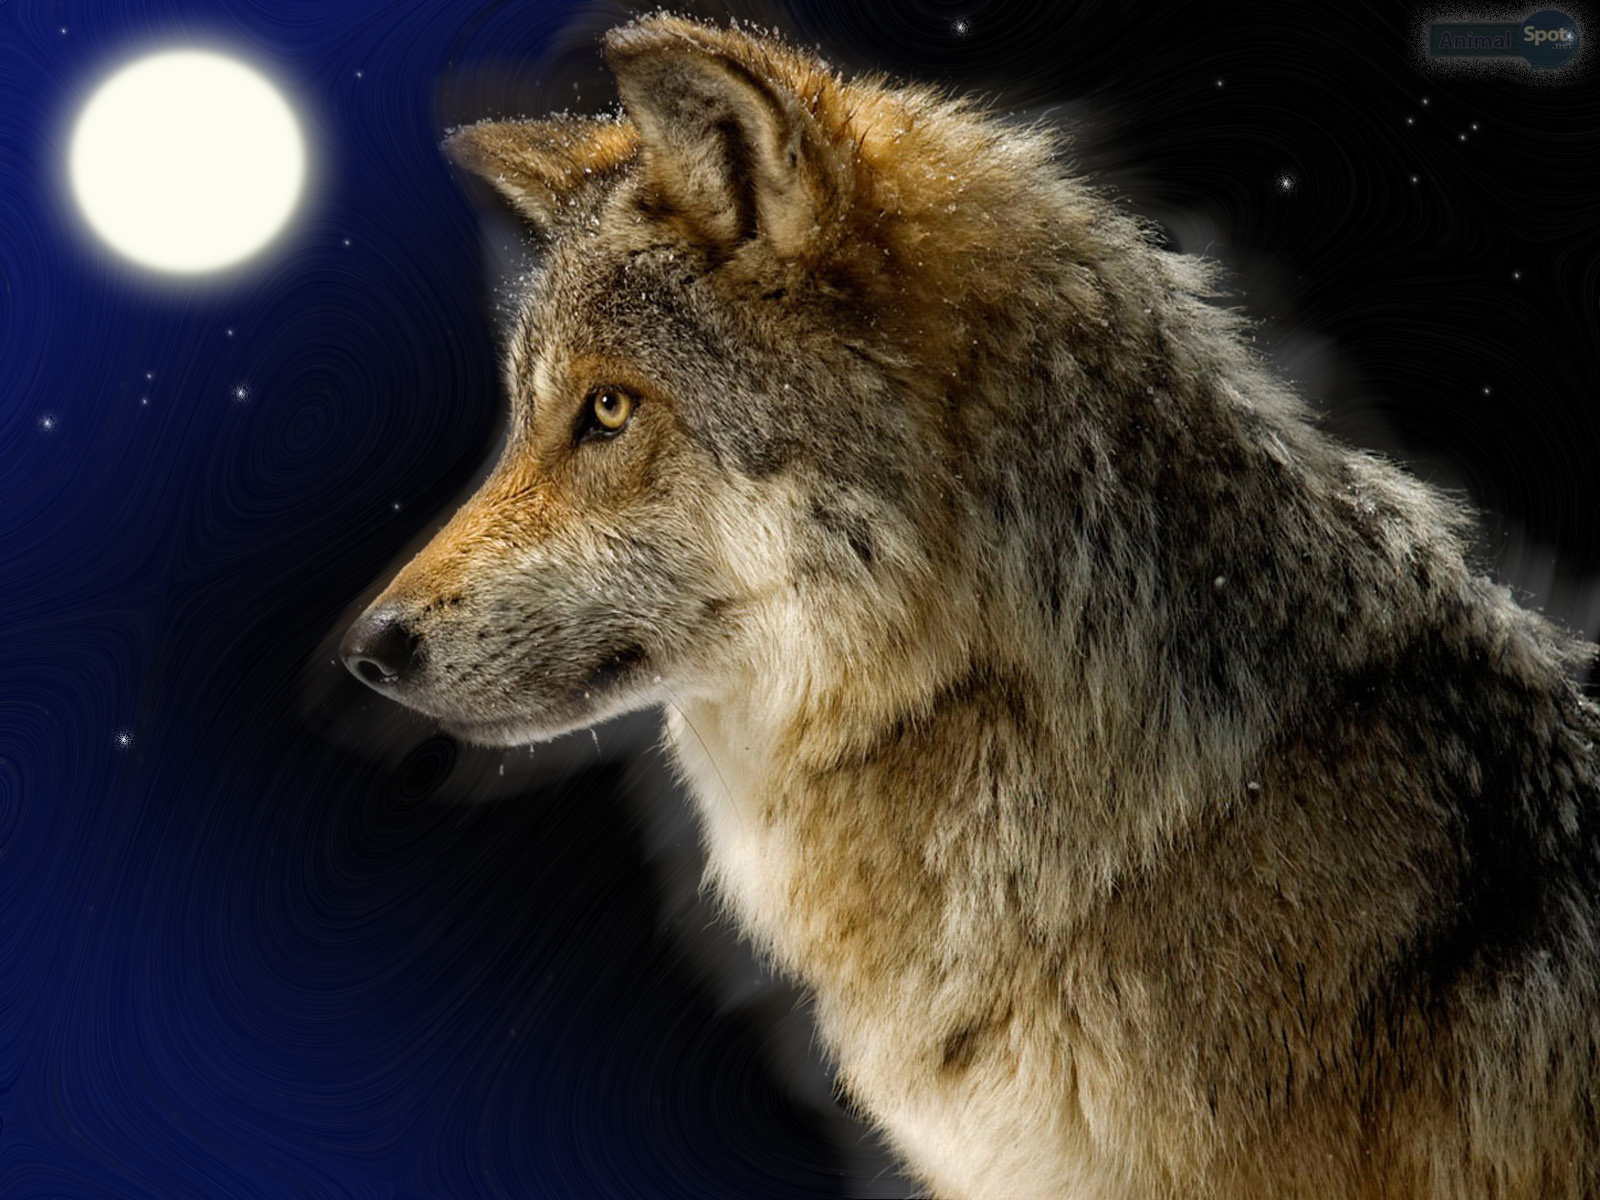 Lone Wolf Hd Wallpaper Download All of the wolf wallpapers bellow have ...